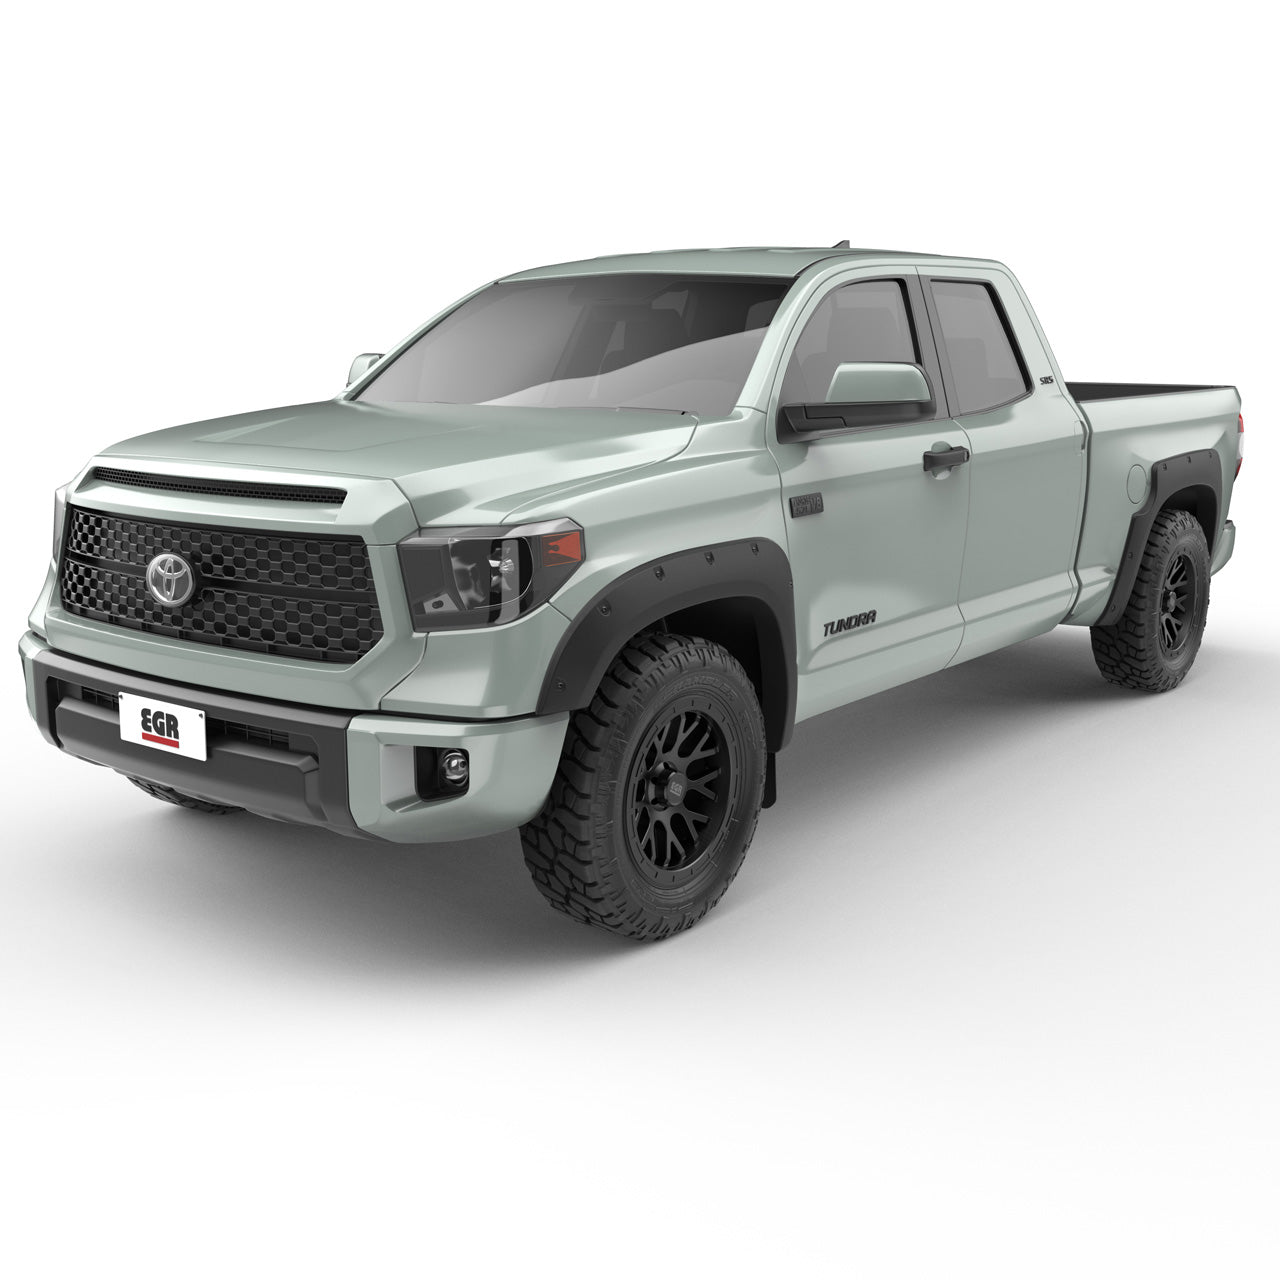 EGR Traditional Bolt-on look Fender Flares with Black-out Bolt Kit - 14-21 Toyota Tundra set of 4